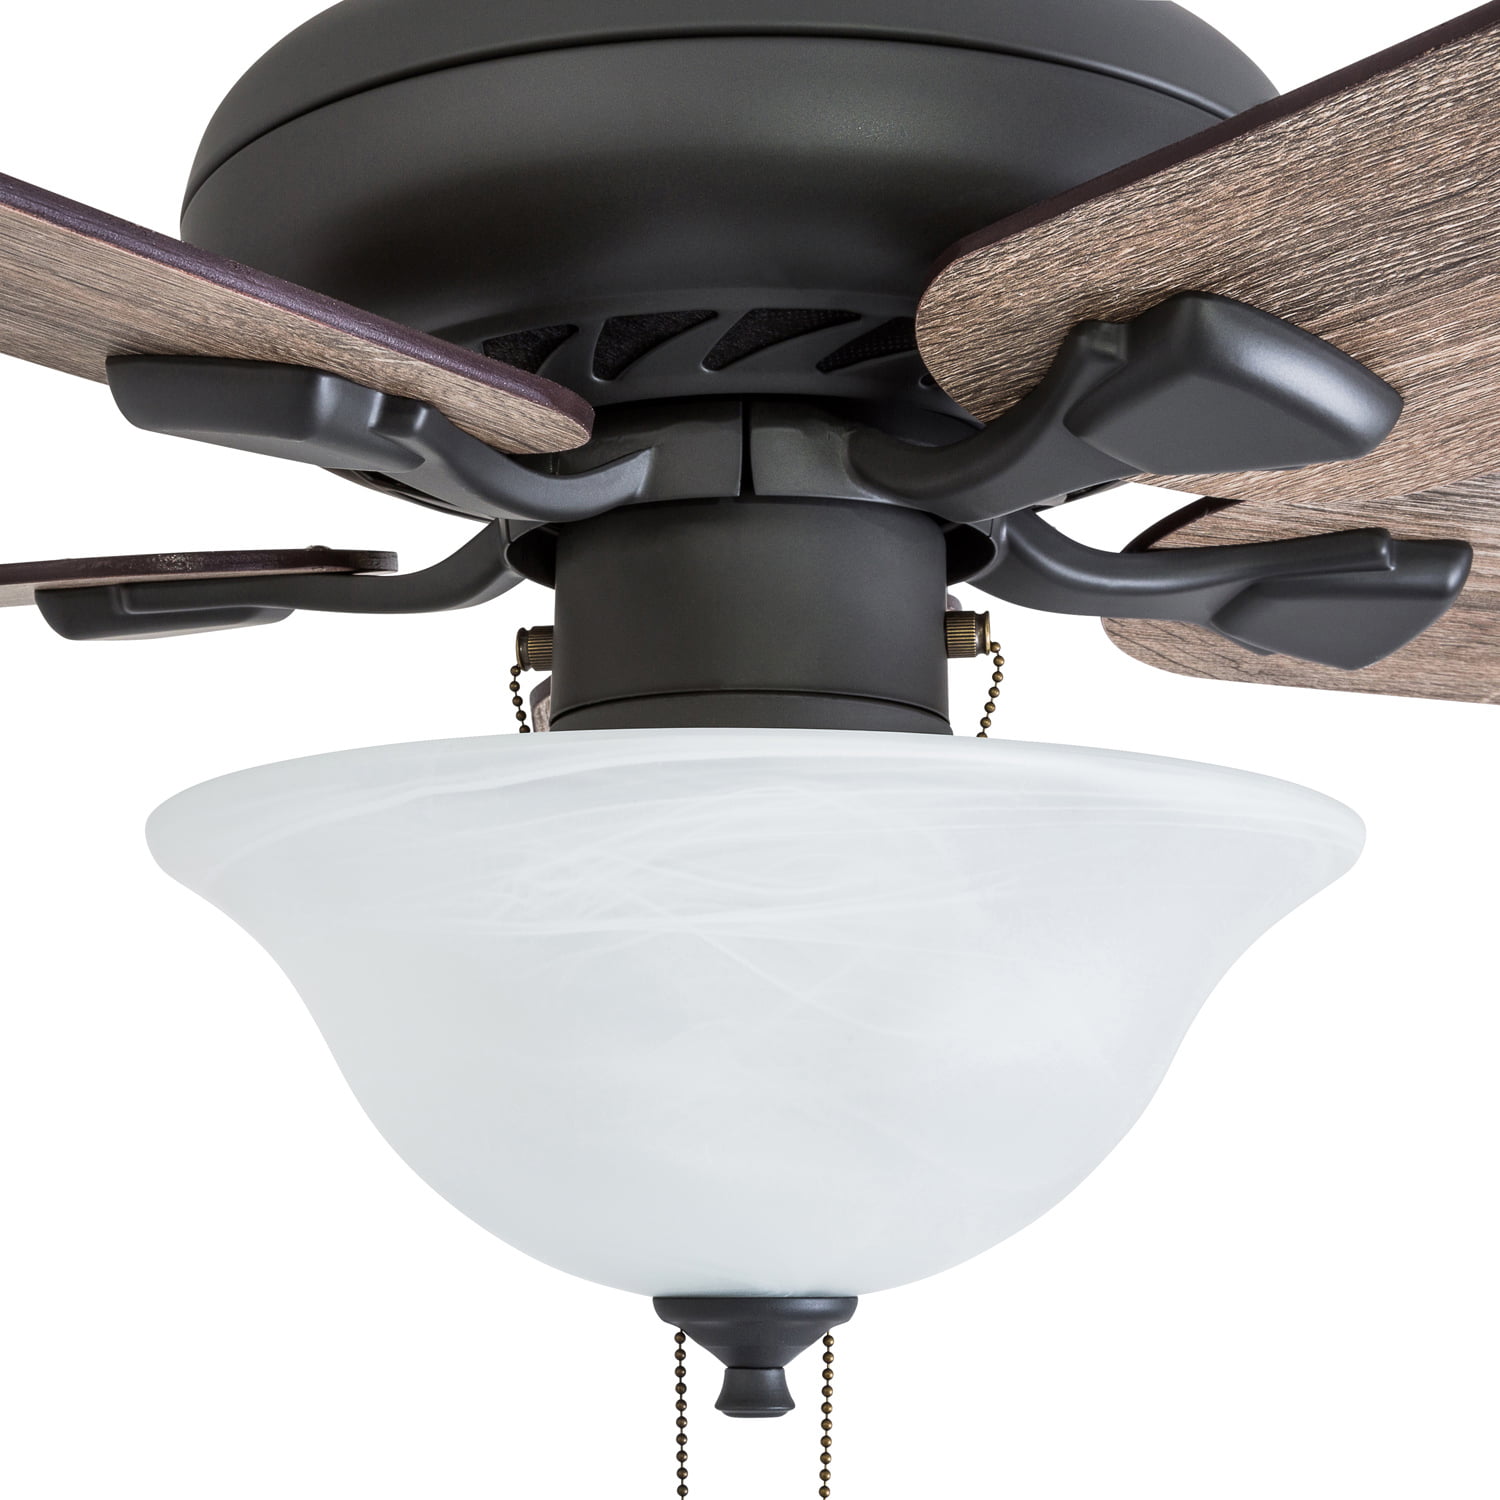 Prominence Home 50764-35 Boulder Ridge Farmhouse 52-Inch Aged Bronze Indoor  Ceiling Fan, LED Bowl Light with Barnwood/Tumbleweed Blades and 3 speed 